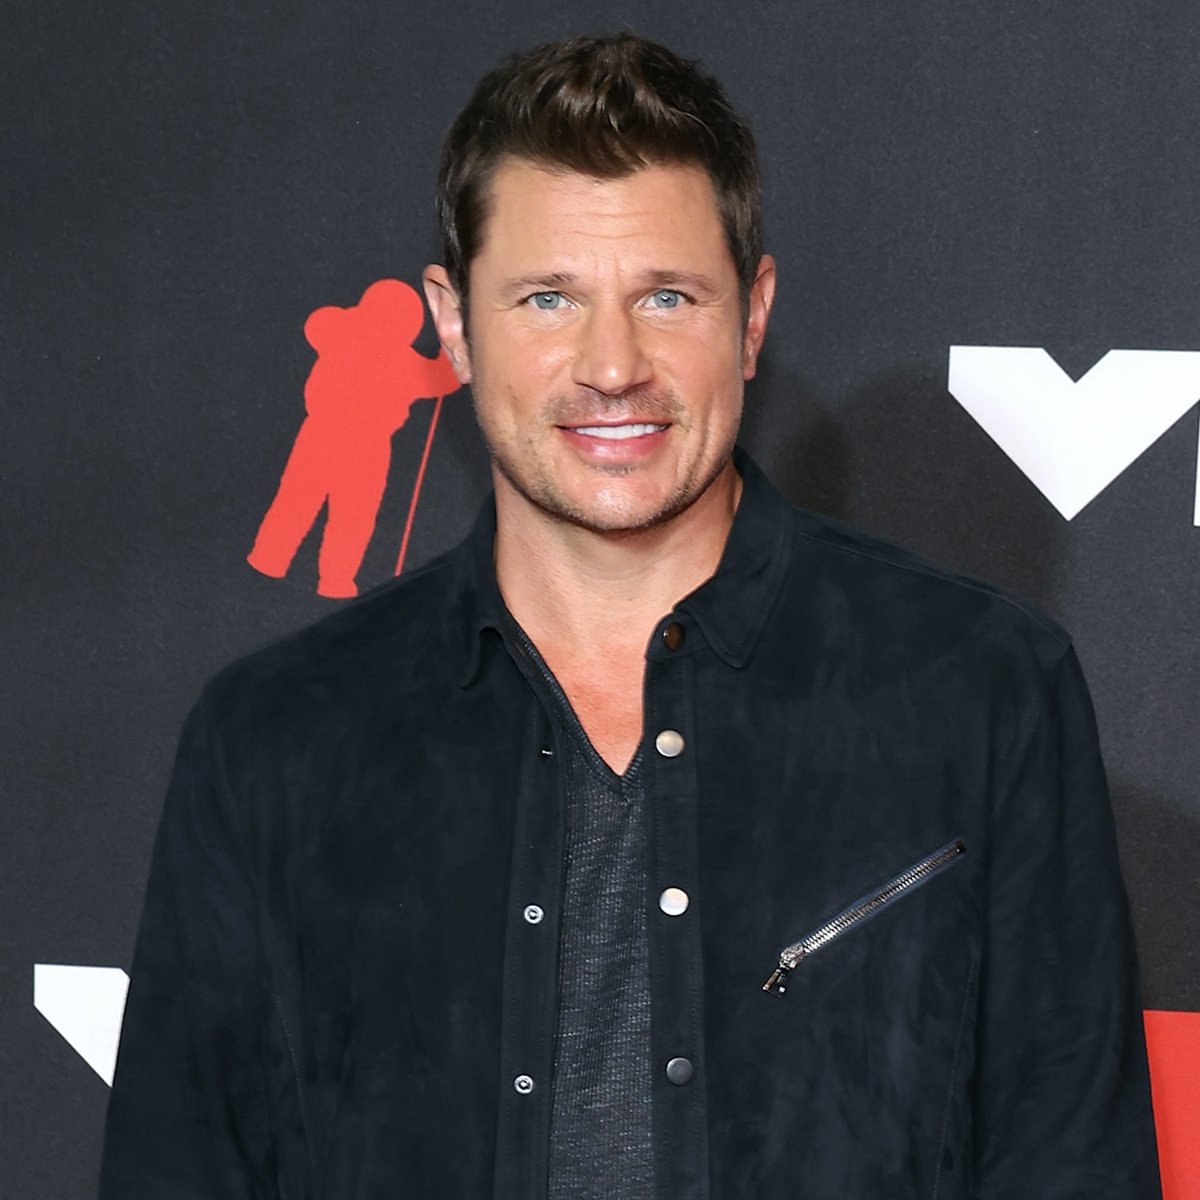 Nick Lachey Attending Anger Management Classes Post-Paparazzi Incident